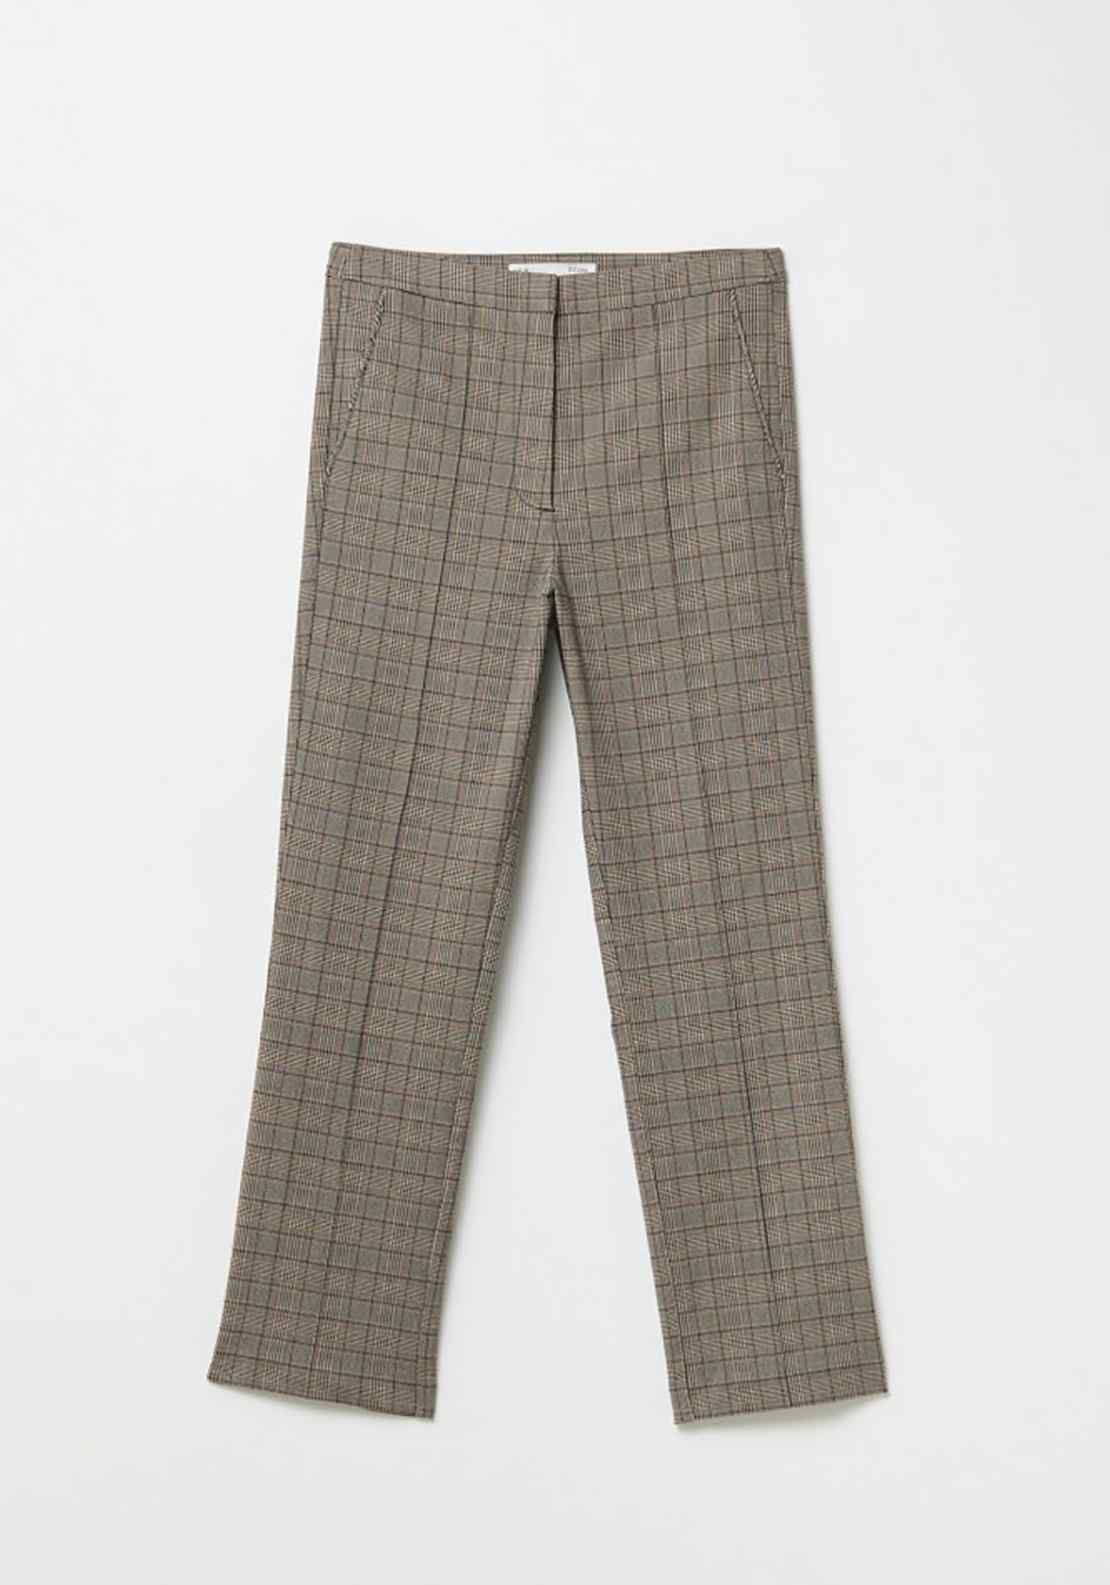 Sfera Jacquard Trousers - Brown 7 Shaws Department Stores